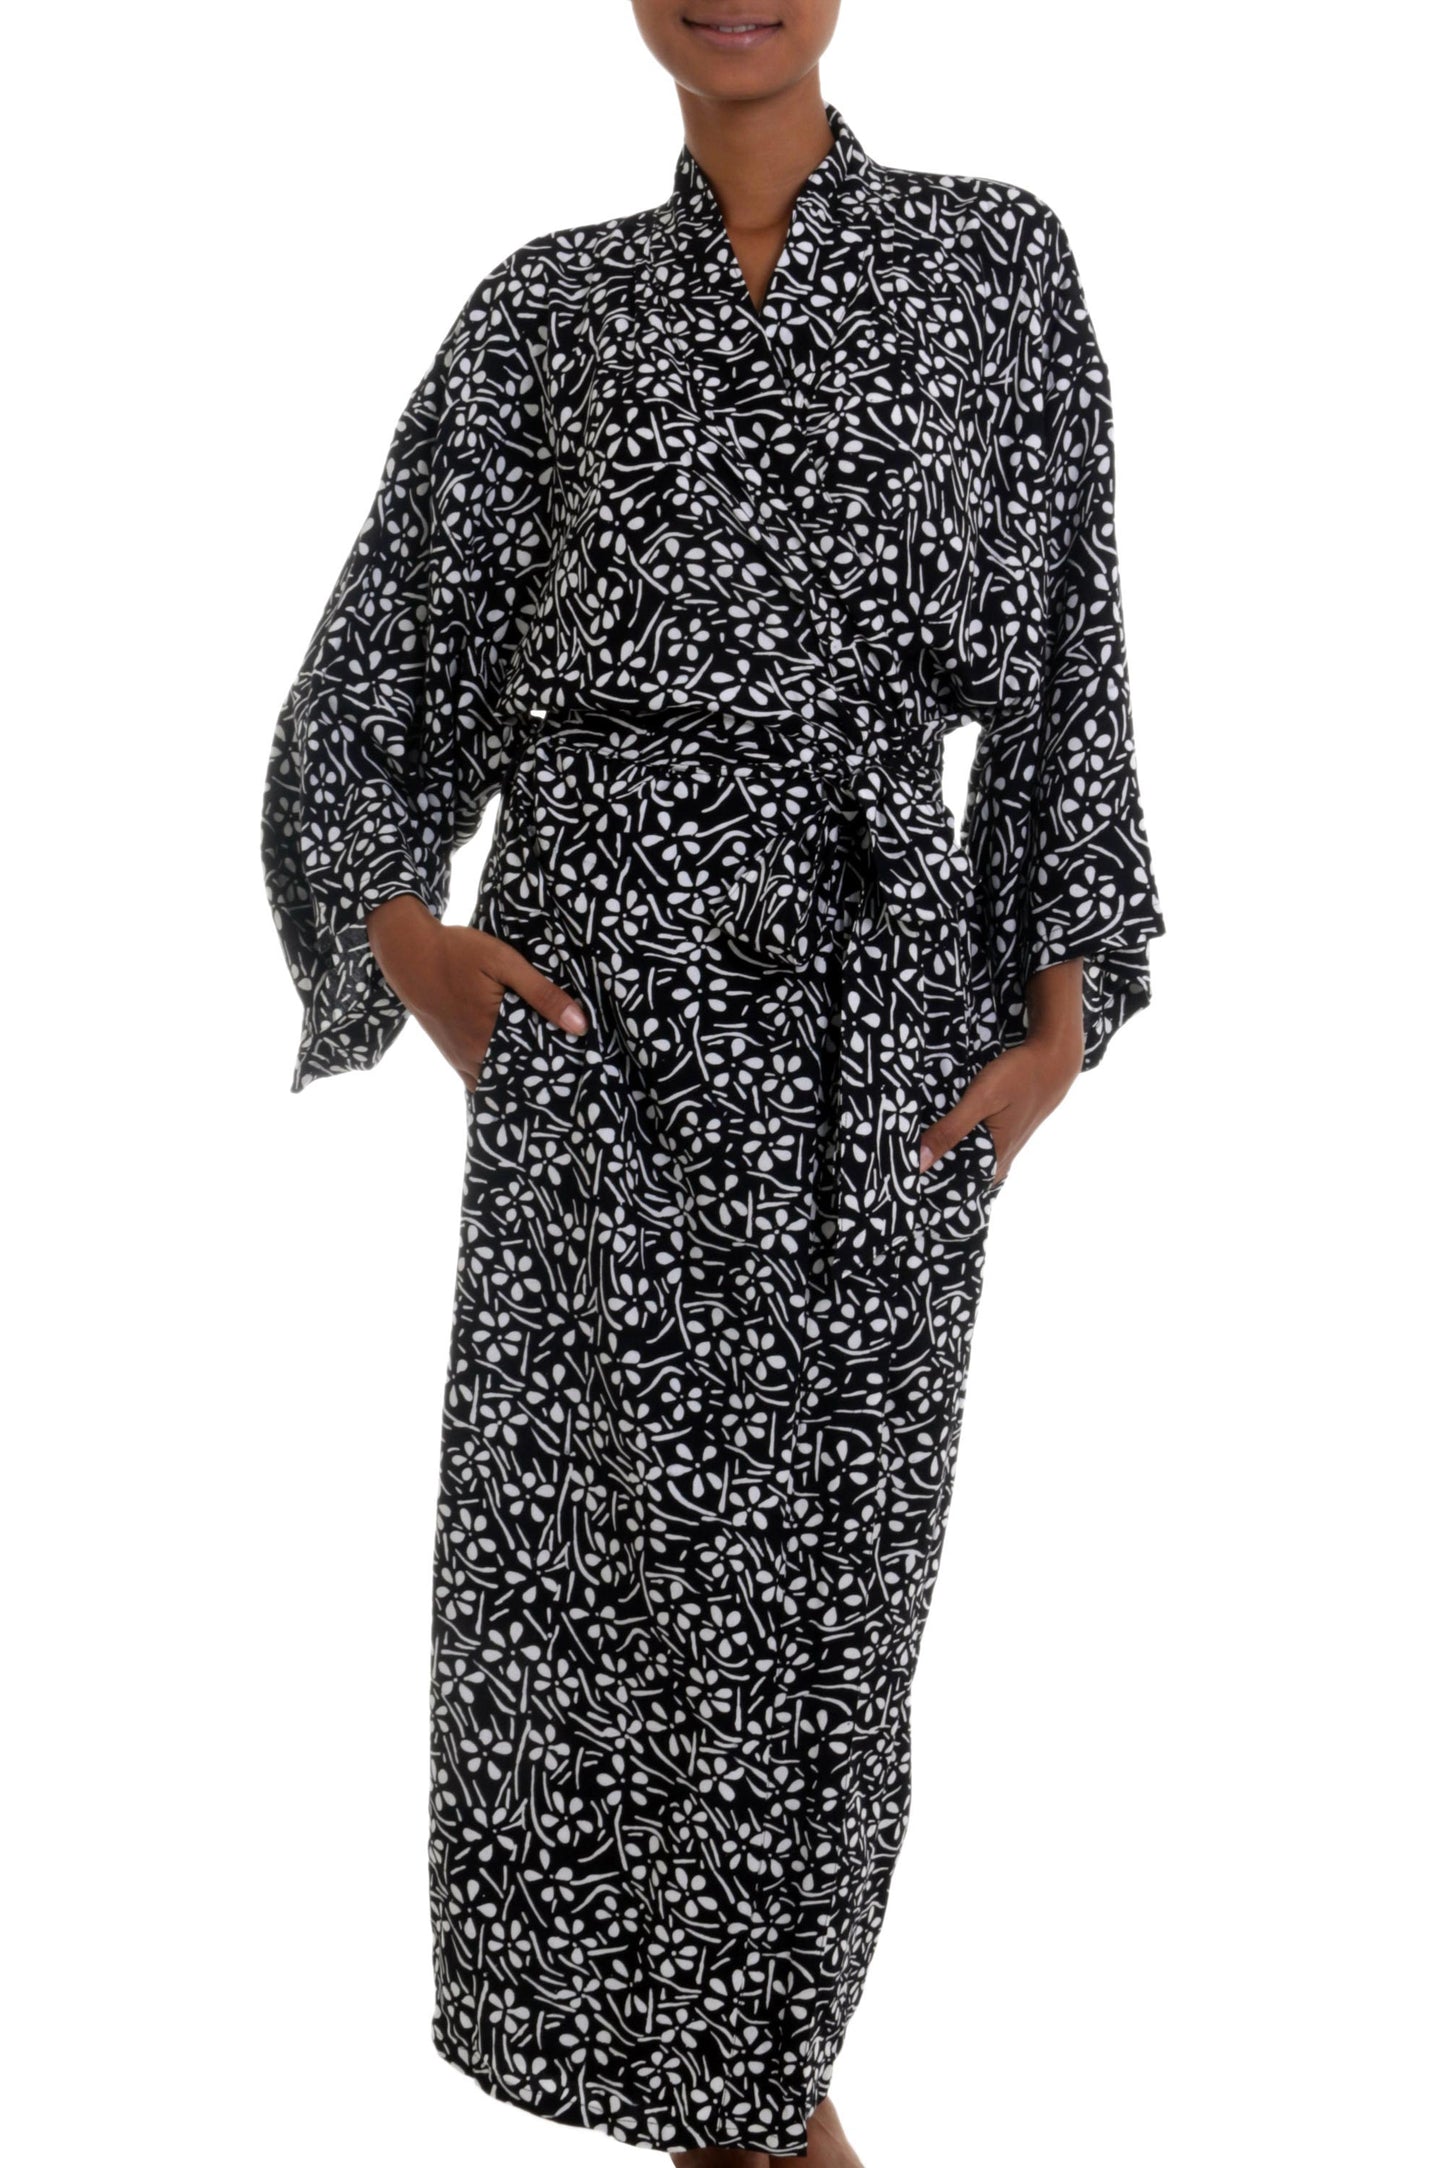 Simple Luxury Black and White Floral Rayon Robe from Indonesia Artisan